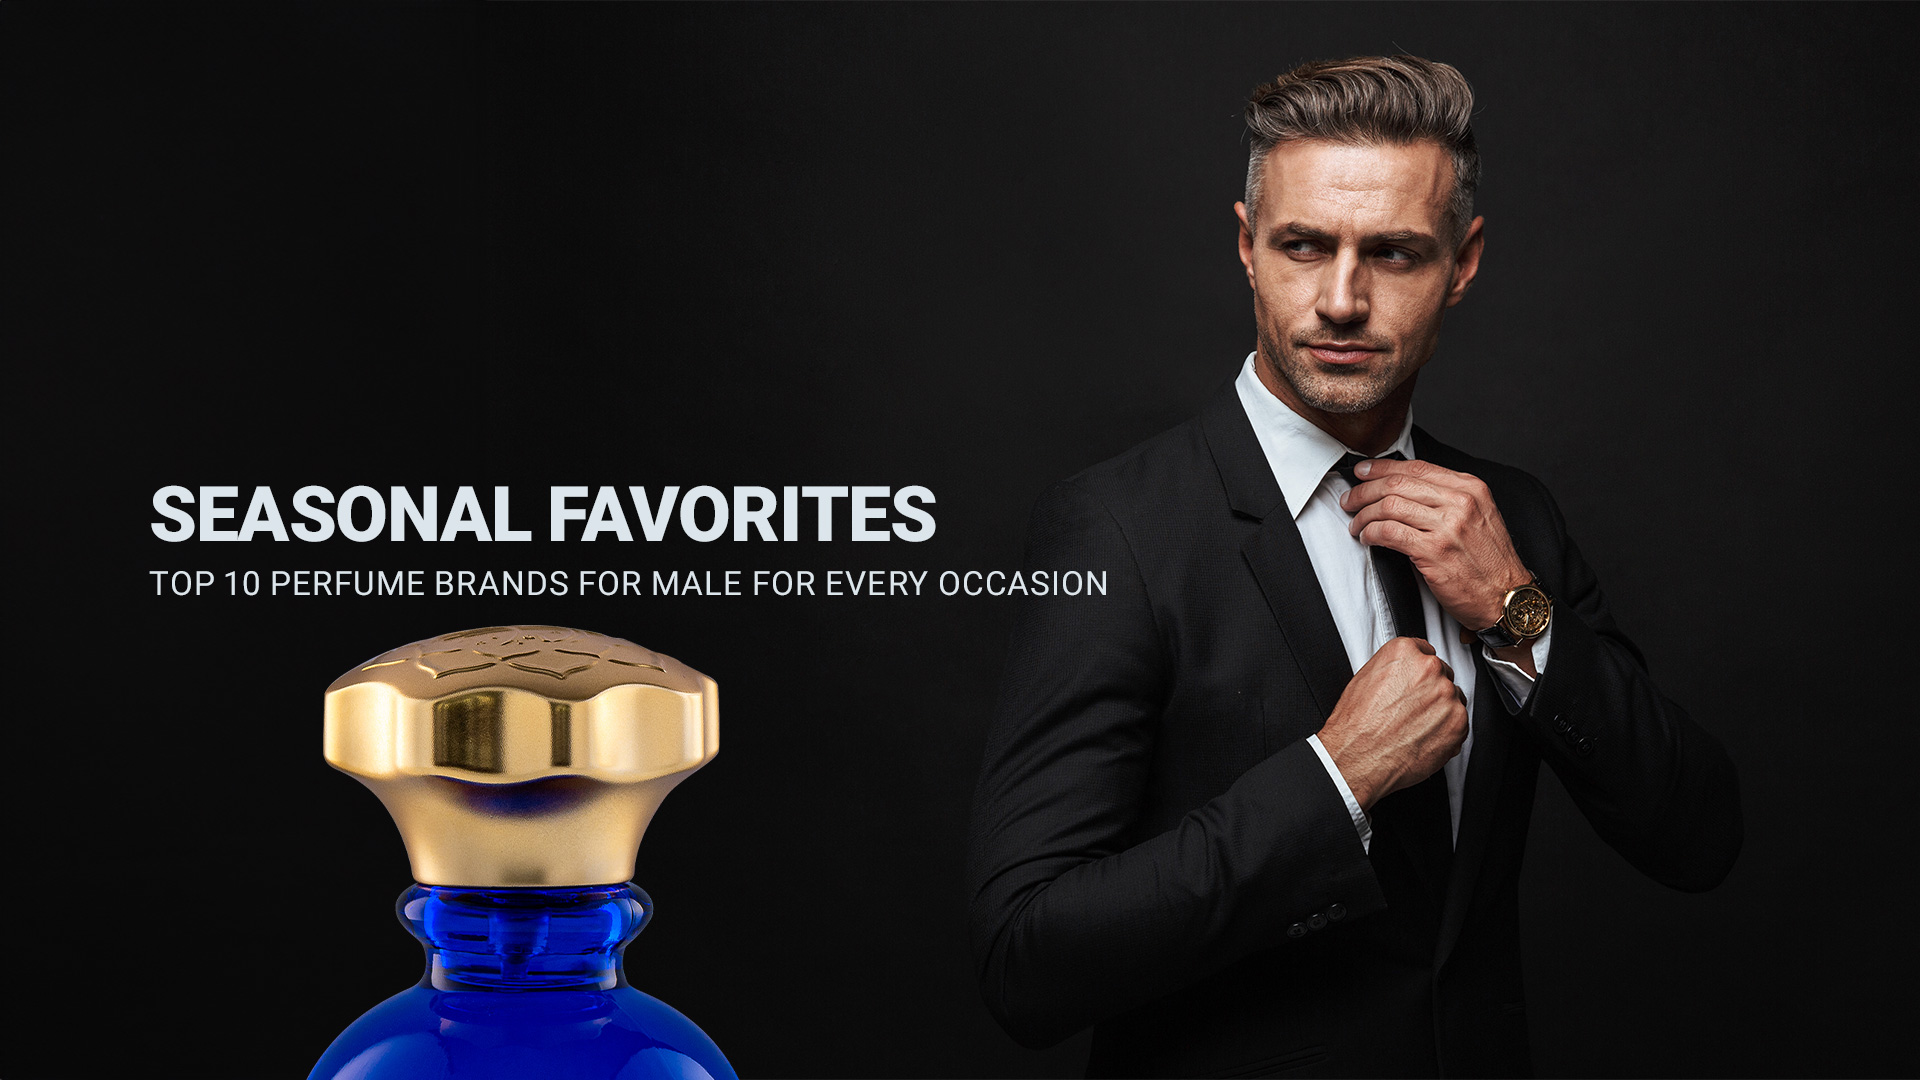 Seasonal Favorites: Top 10 Perfume Brands for Male for Every Occasion ​